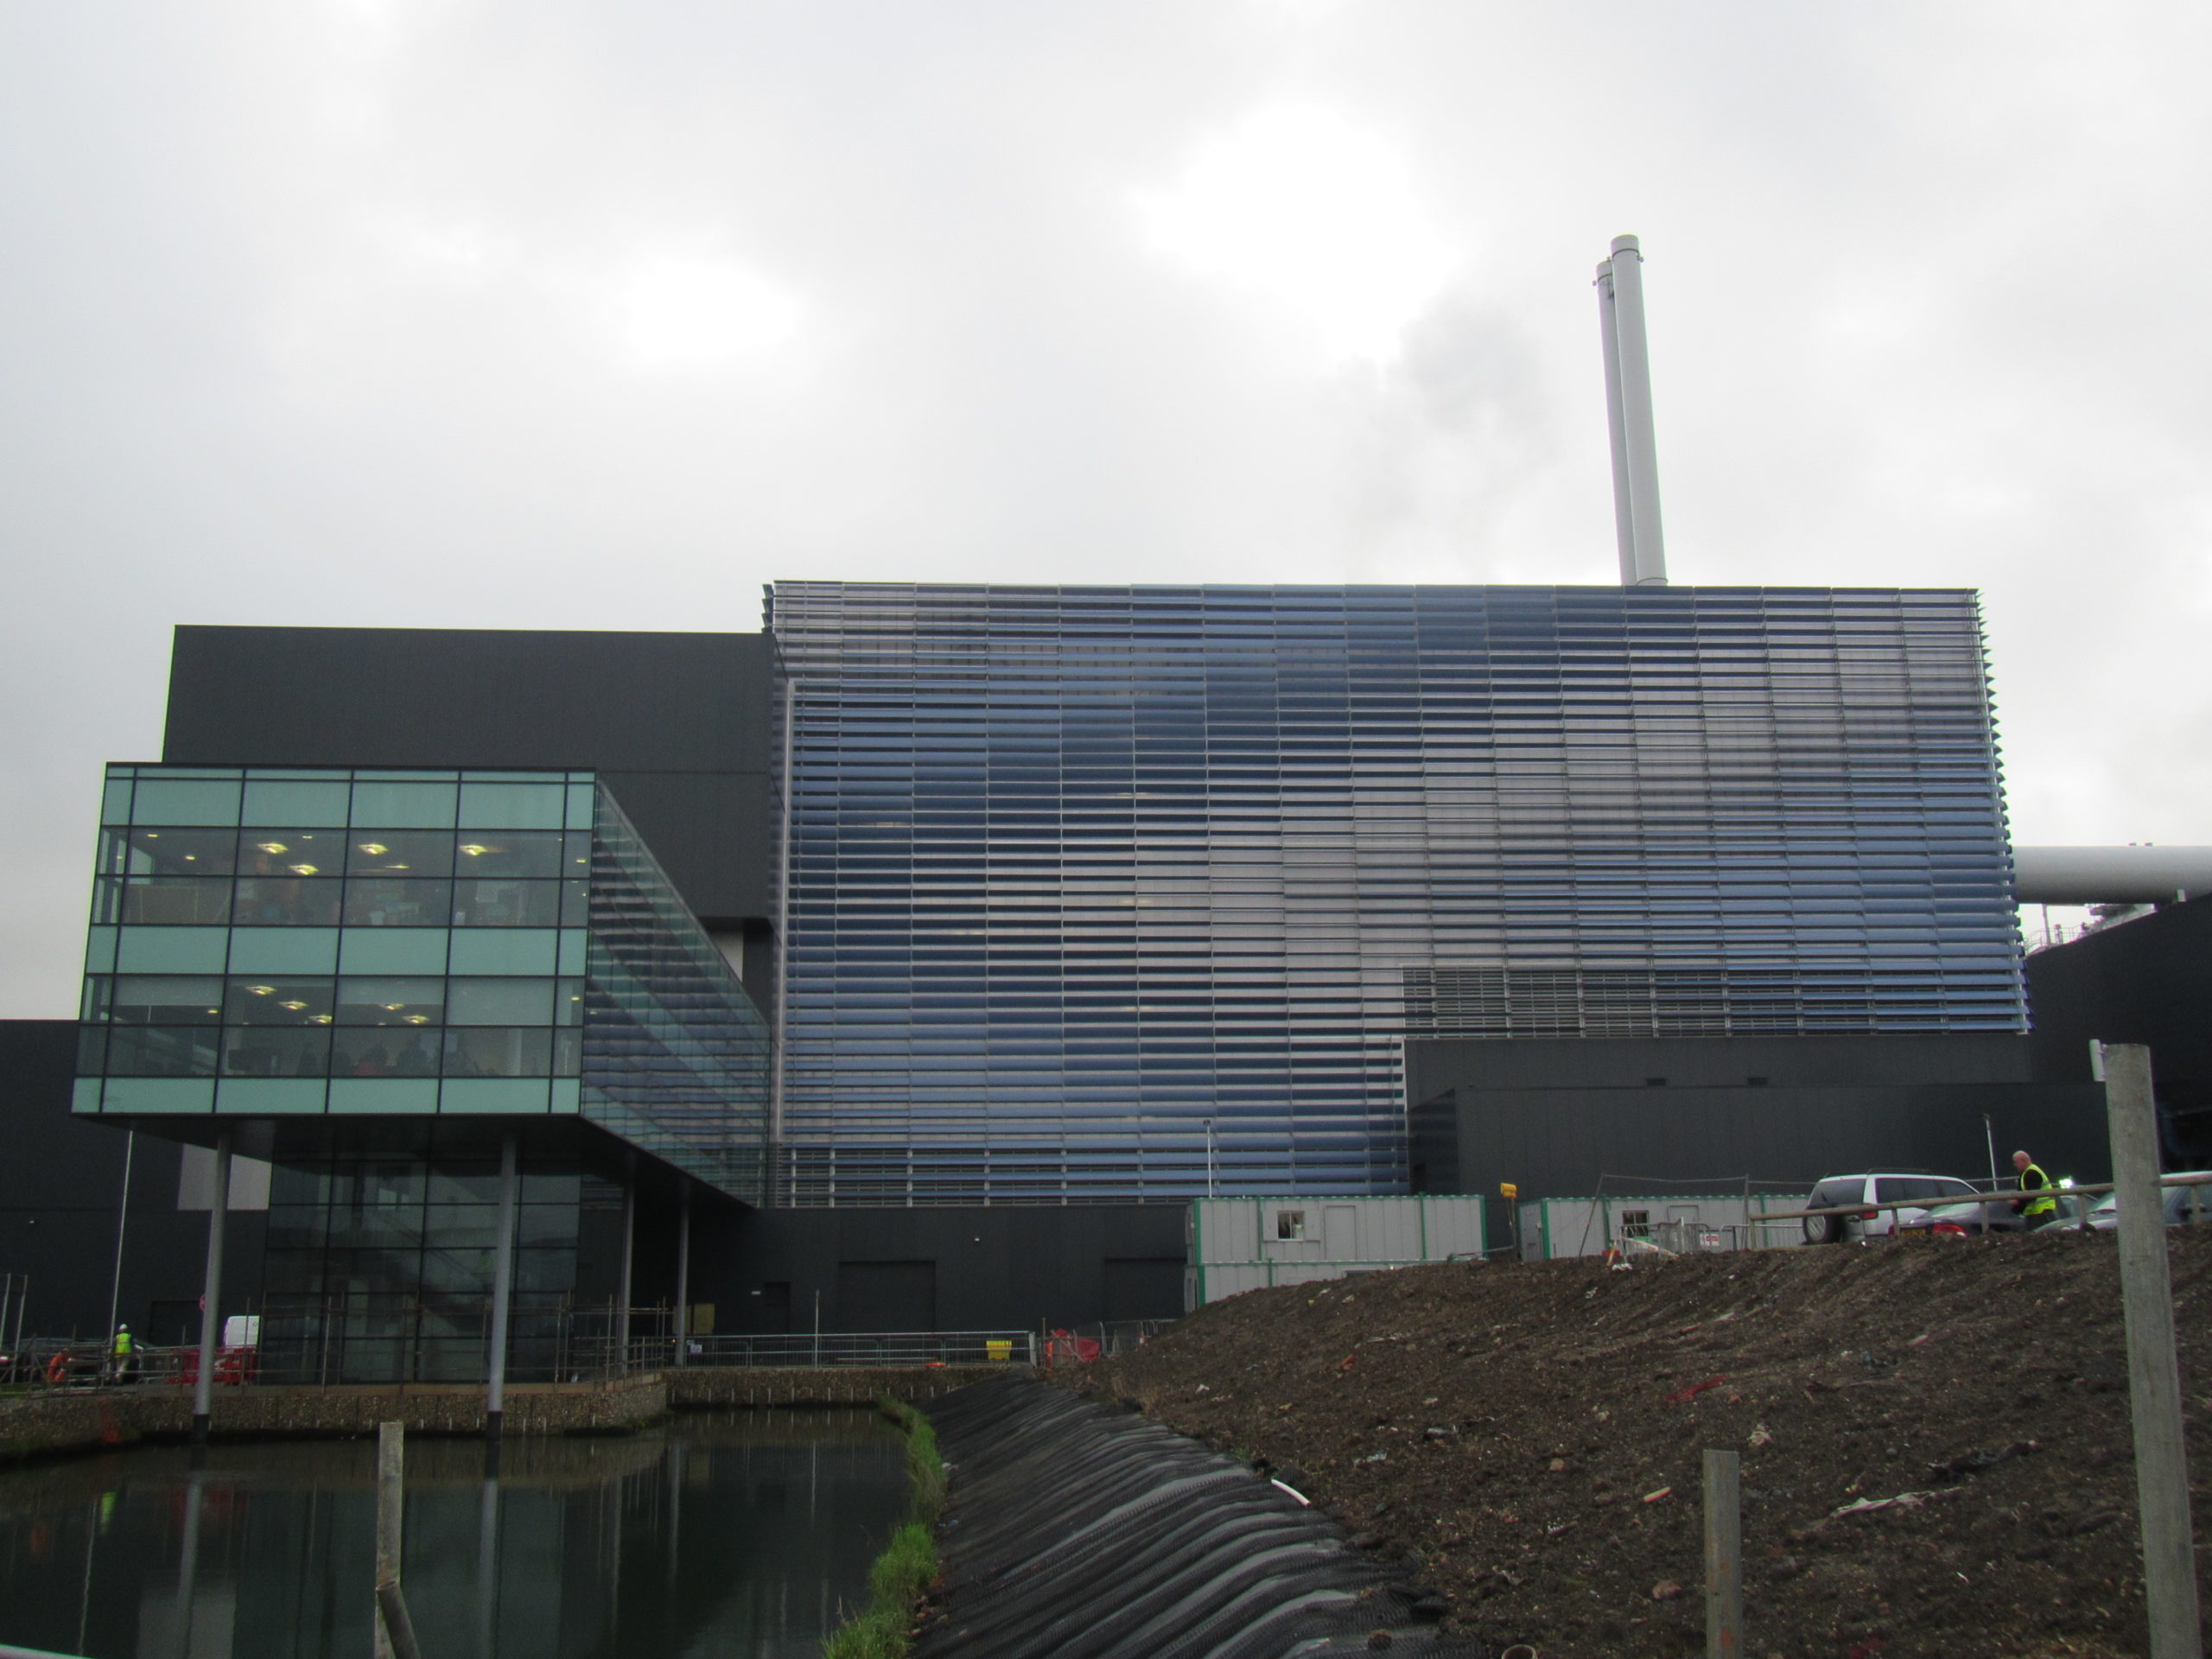 Suez's energy from waste plant at Great Blakenham will receive waste from Norfolk until at least 2020